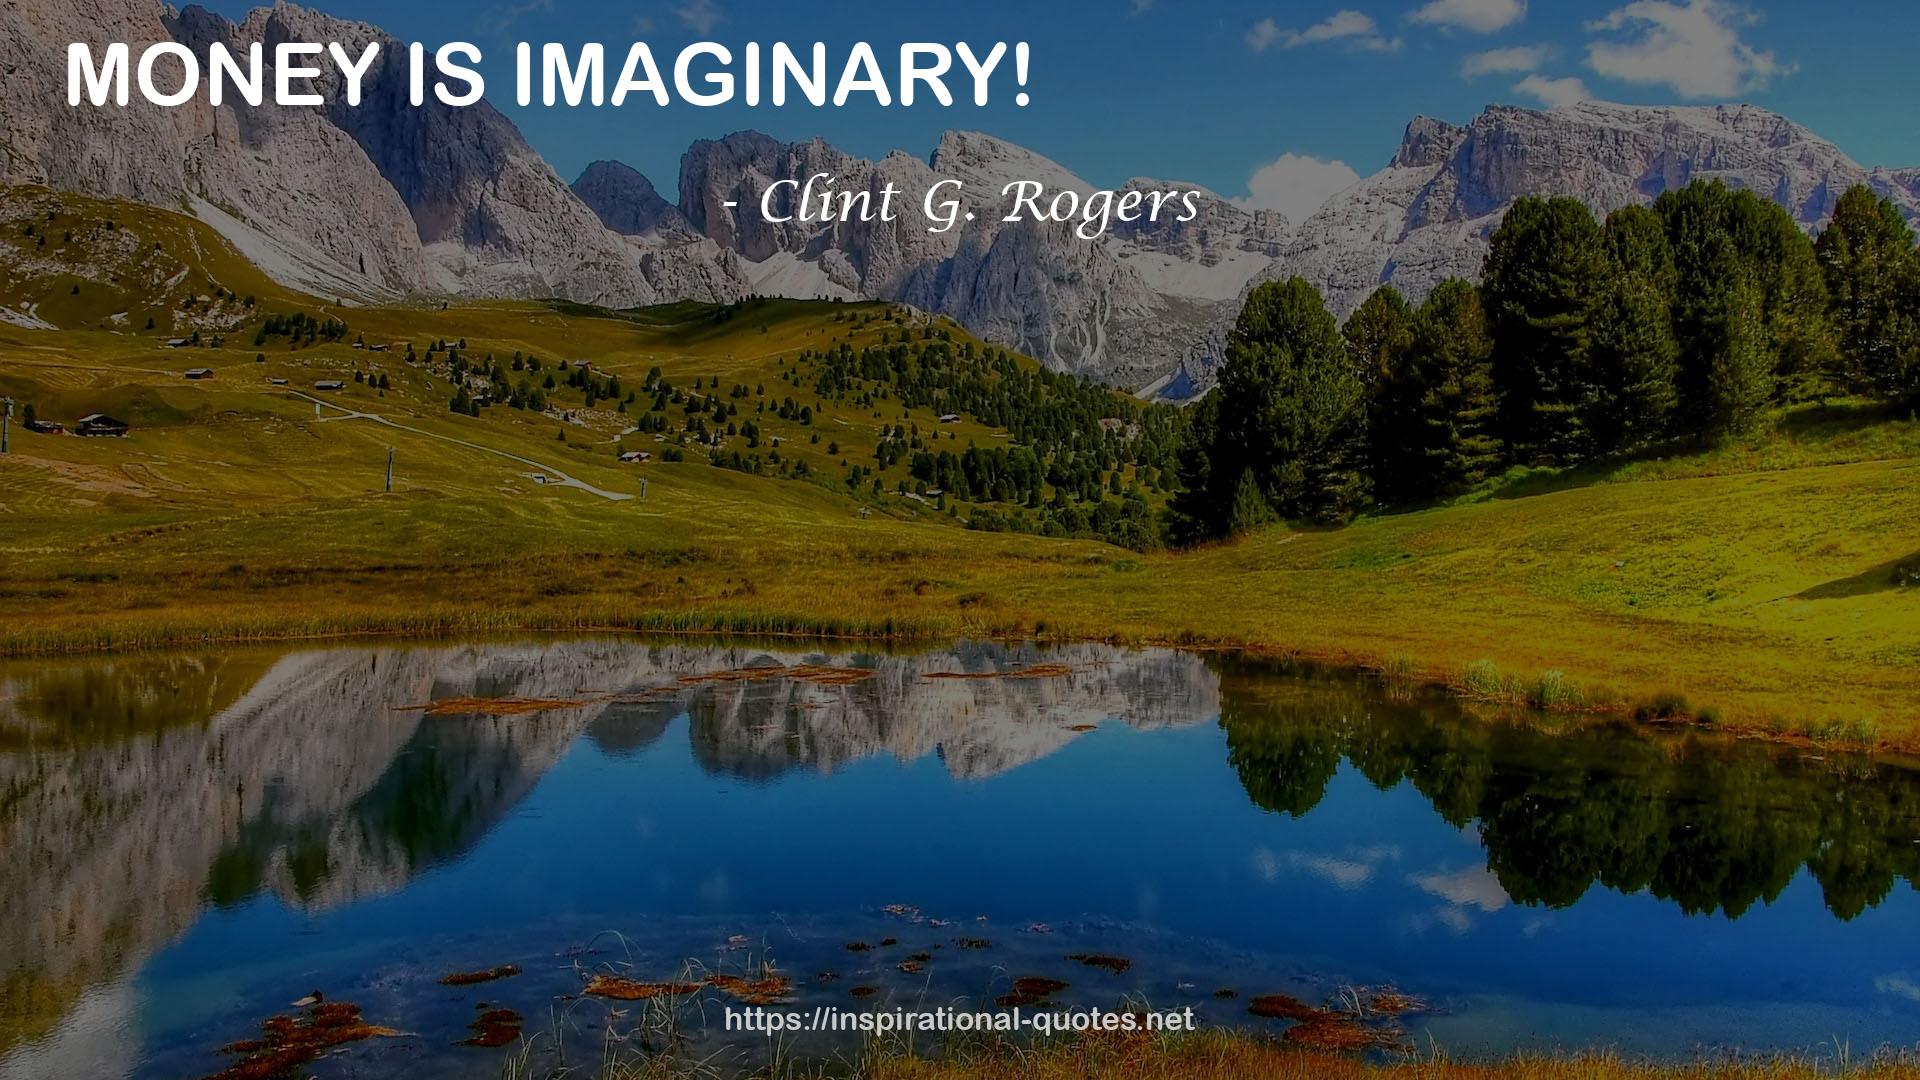 Clint G. Rogers QUOTES